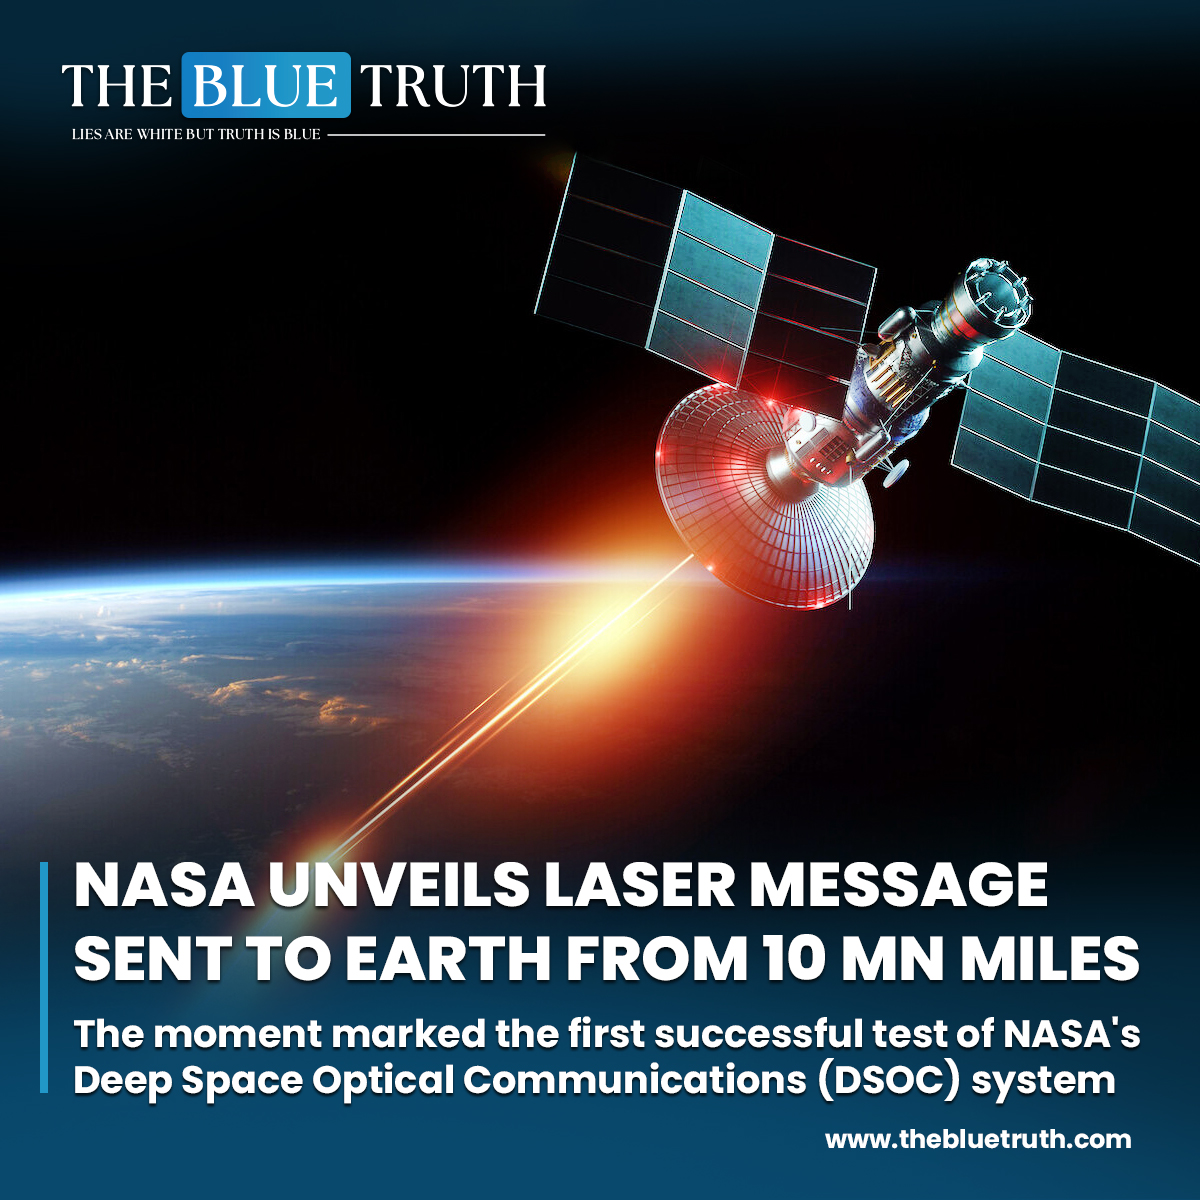 NASA unveils laser message sent to Earth from 10 mn miles.
The moment marked the first successful test of NASA's Deep Space Optical Communications (DSOC) system

#NASADeepSpaceCommunication #DSOCLaserSystem #SpaceTechnology #NASAInnovation #SpaceCommunication #TBT #TheBlueTruth